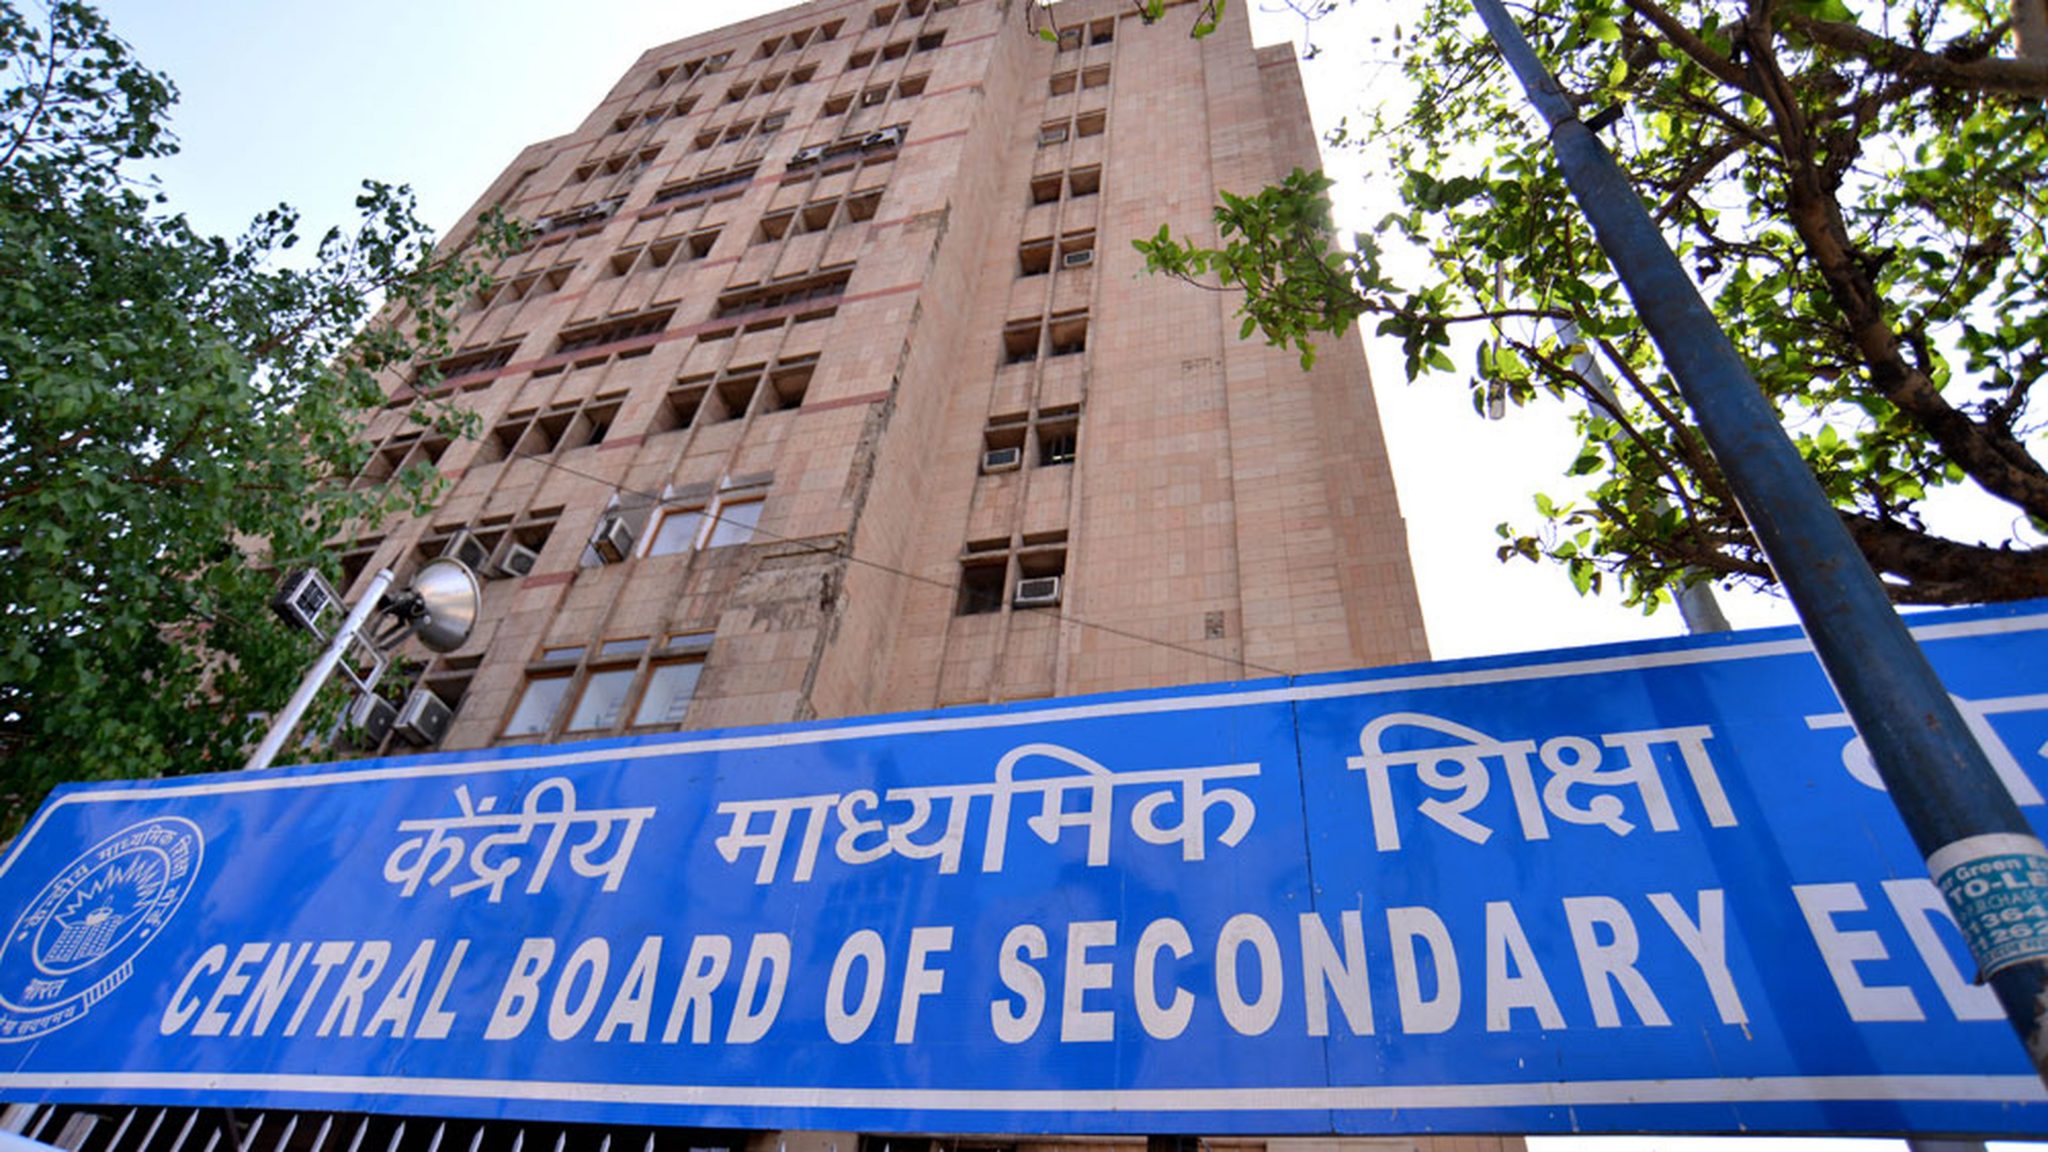 Government may scrap CBSE exams, defer NEET, JEE